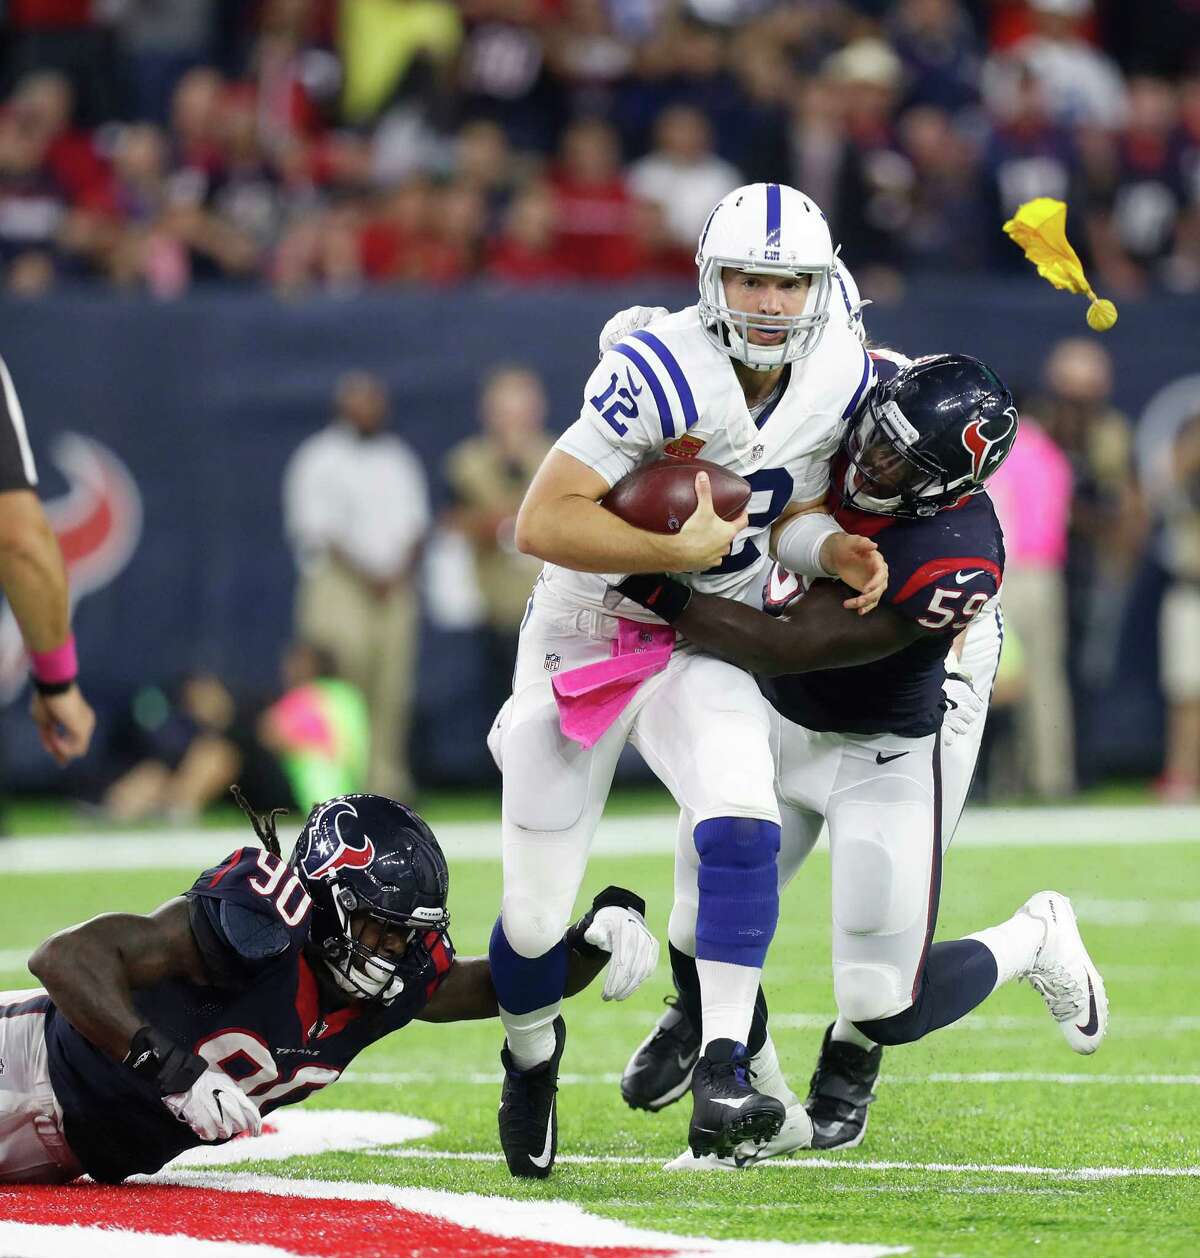 Indianapolis Colts quarterback Andrew Luck (12) is sacked by Houston Texans outside linebacker Whitney Mercilus (59) and defensive end Jadeveon Clowney (90) during the third quarter of an NFL football game at NRG Stadium, Sunday,Oct. 16, 2016 in Houston. ( Karen Warren / Houston Chronicle )